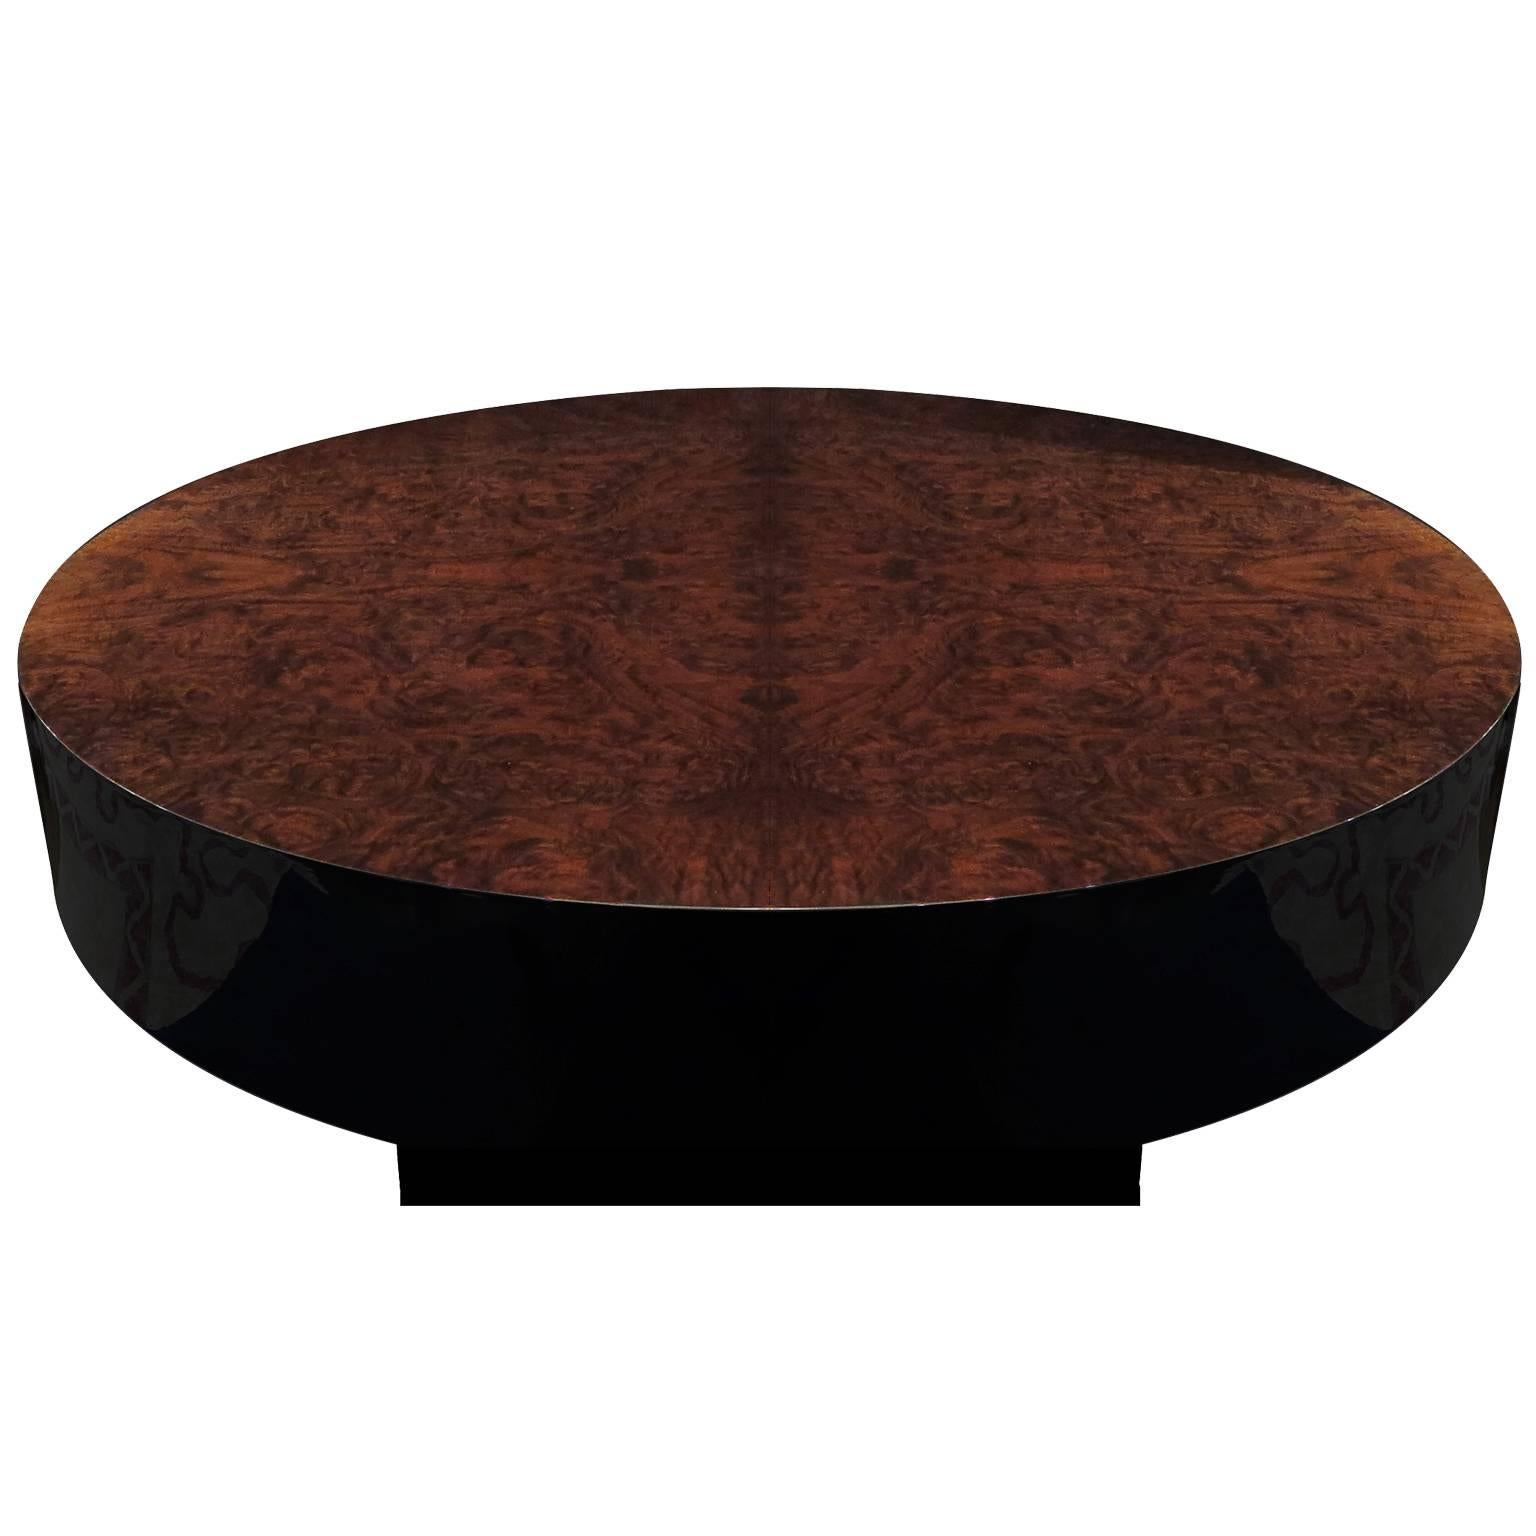 Round Mid-Century coffee table in beautiful walnut burl veneer on top with black lacquer frame and base. Coffee table pulls out to an inside bar. Interior holds glasses and decanters as well as other barware. Brass detailing on top edge of interior